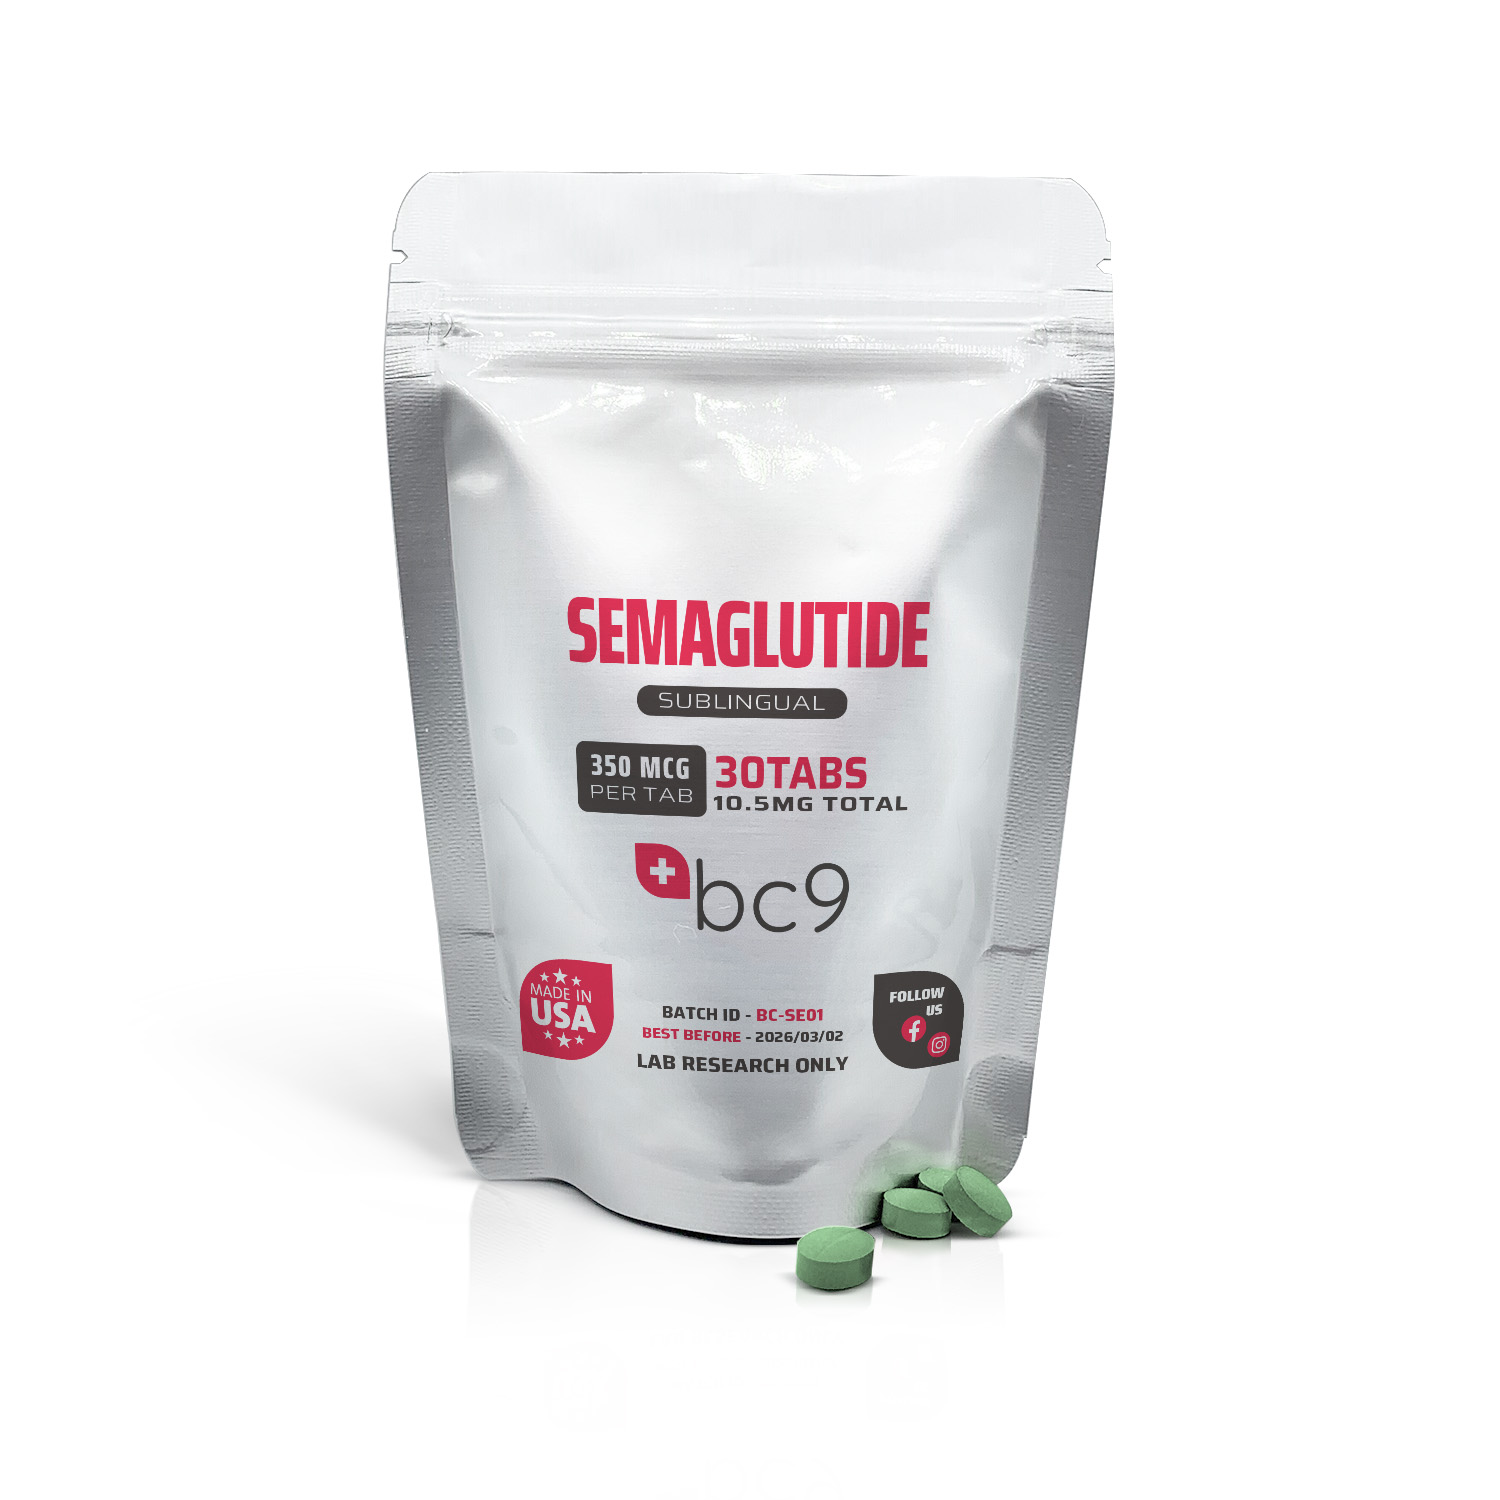 Semaglutide Sublingual Tablets For Sale | BC9.org